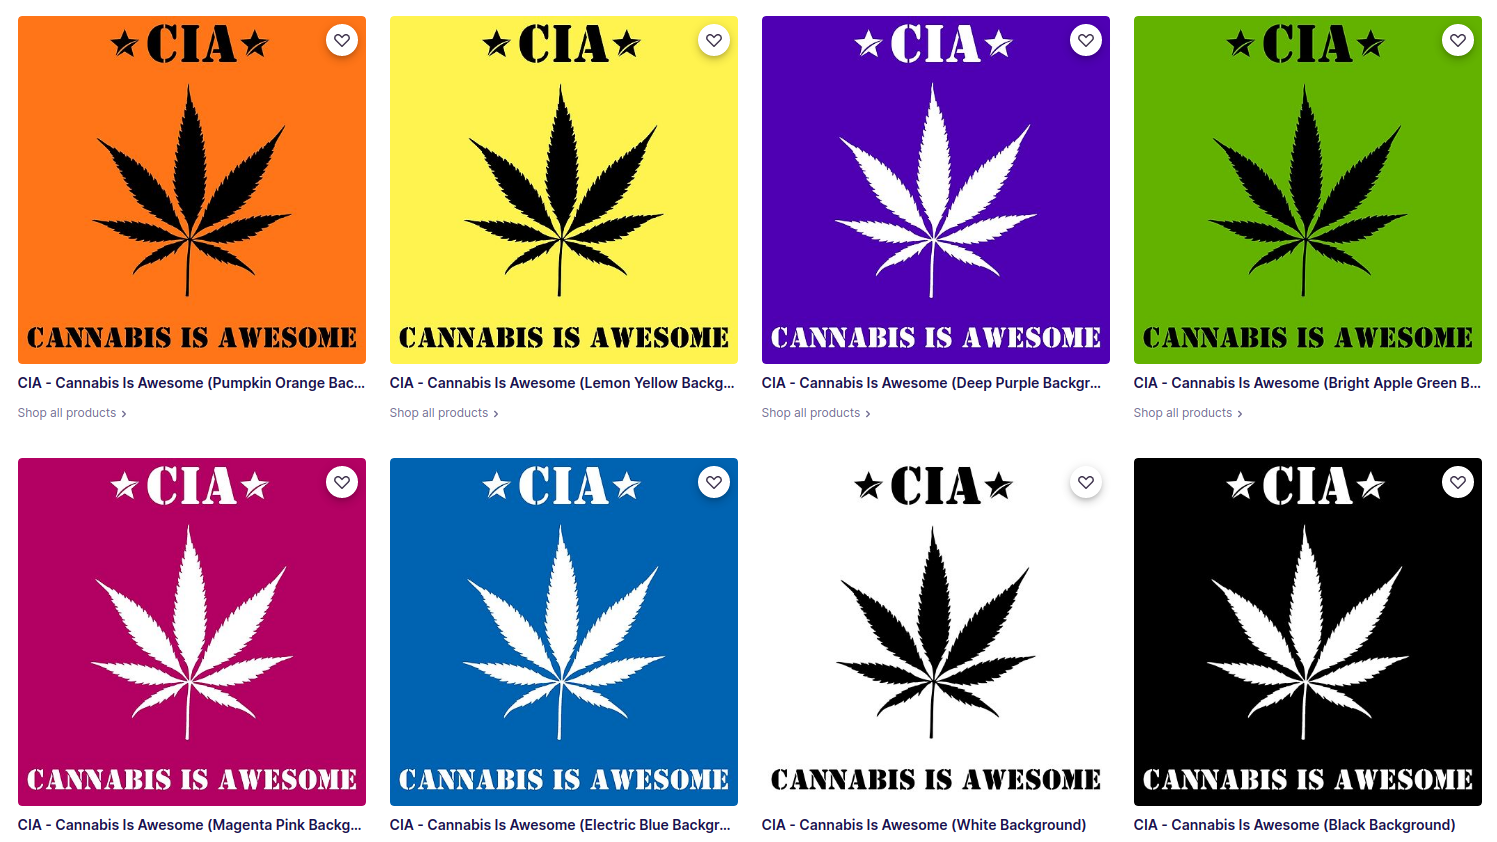 CIA - Cannabis Is Awesome